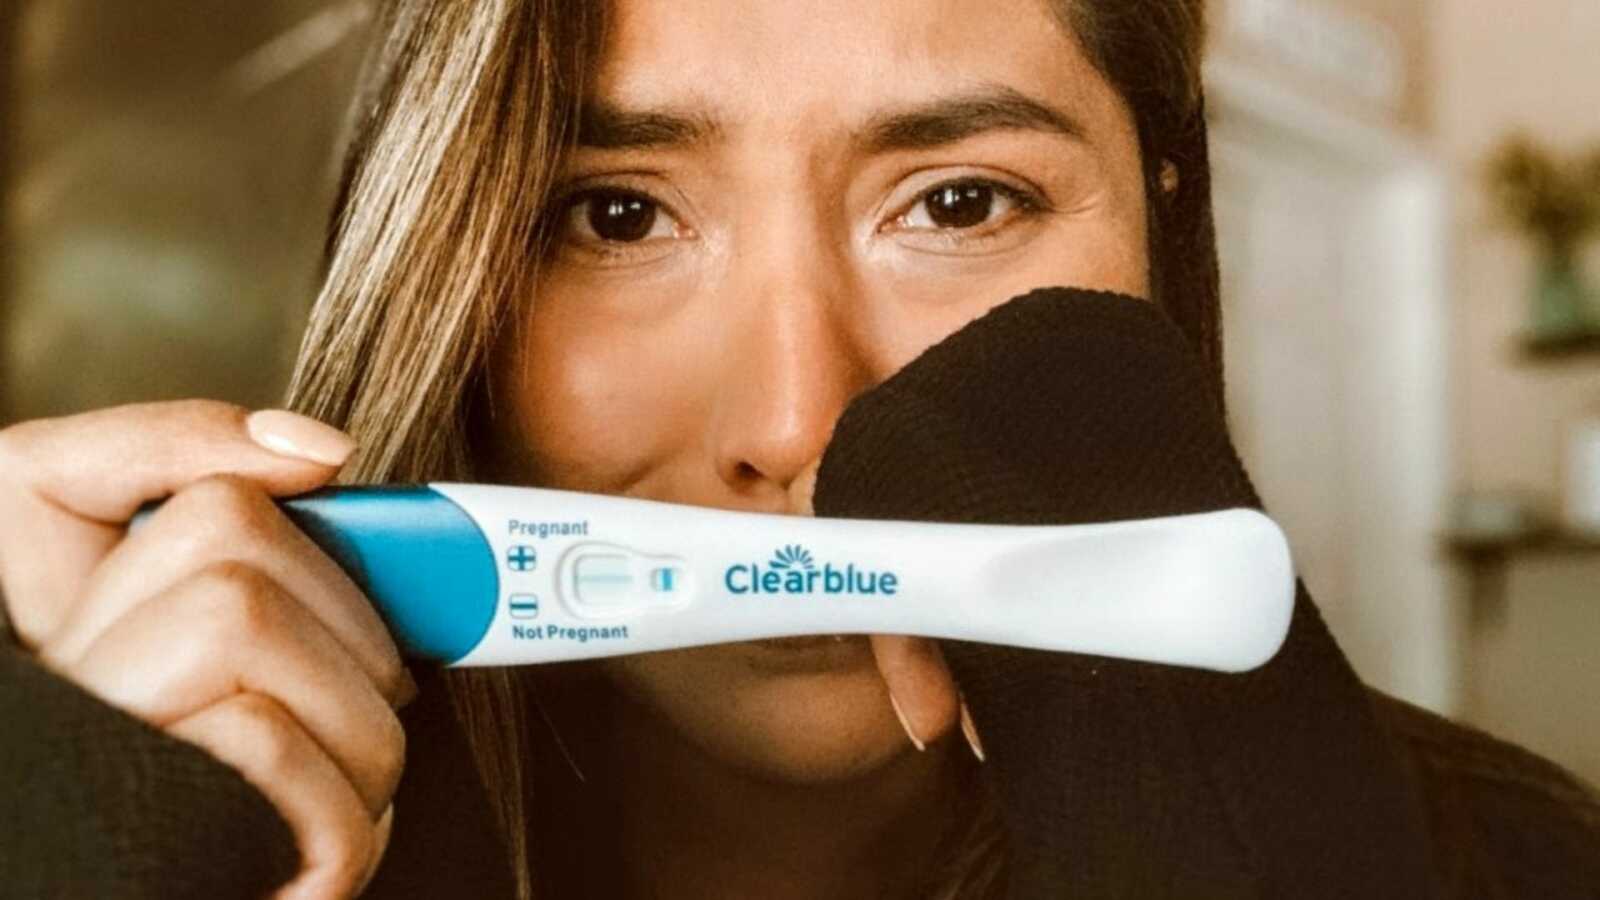 Woman holds up a negative pregnancy test while crying